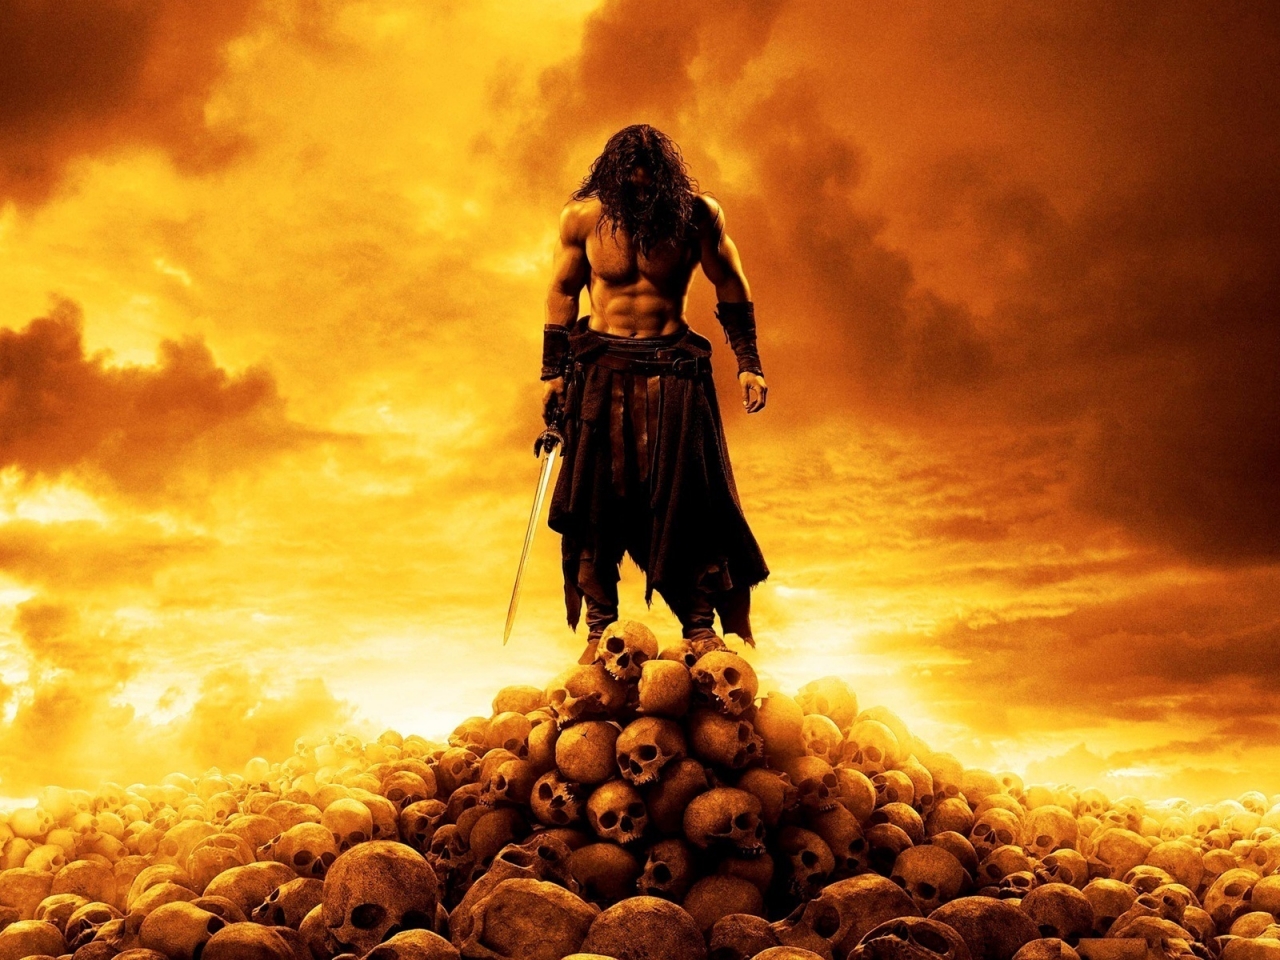 Conan the Barbarian 2011 for 1280 x 960 resolution